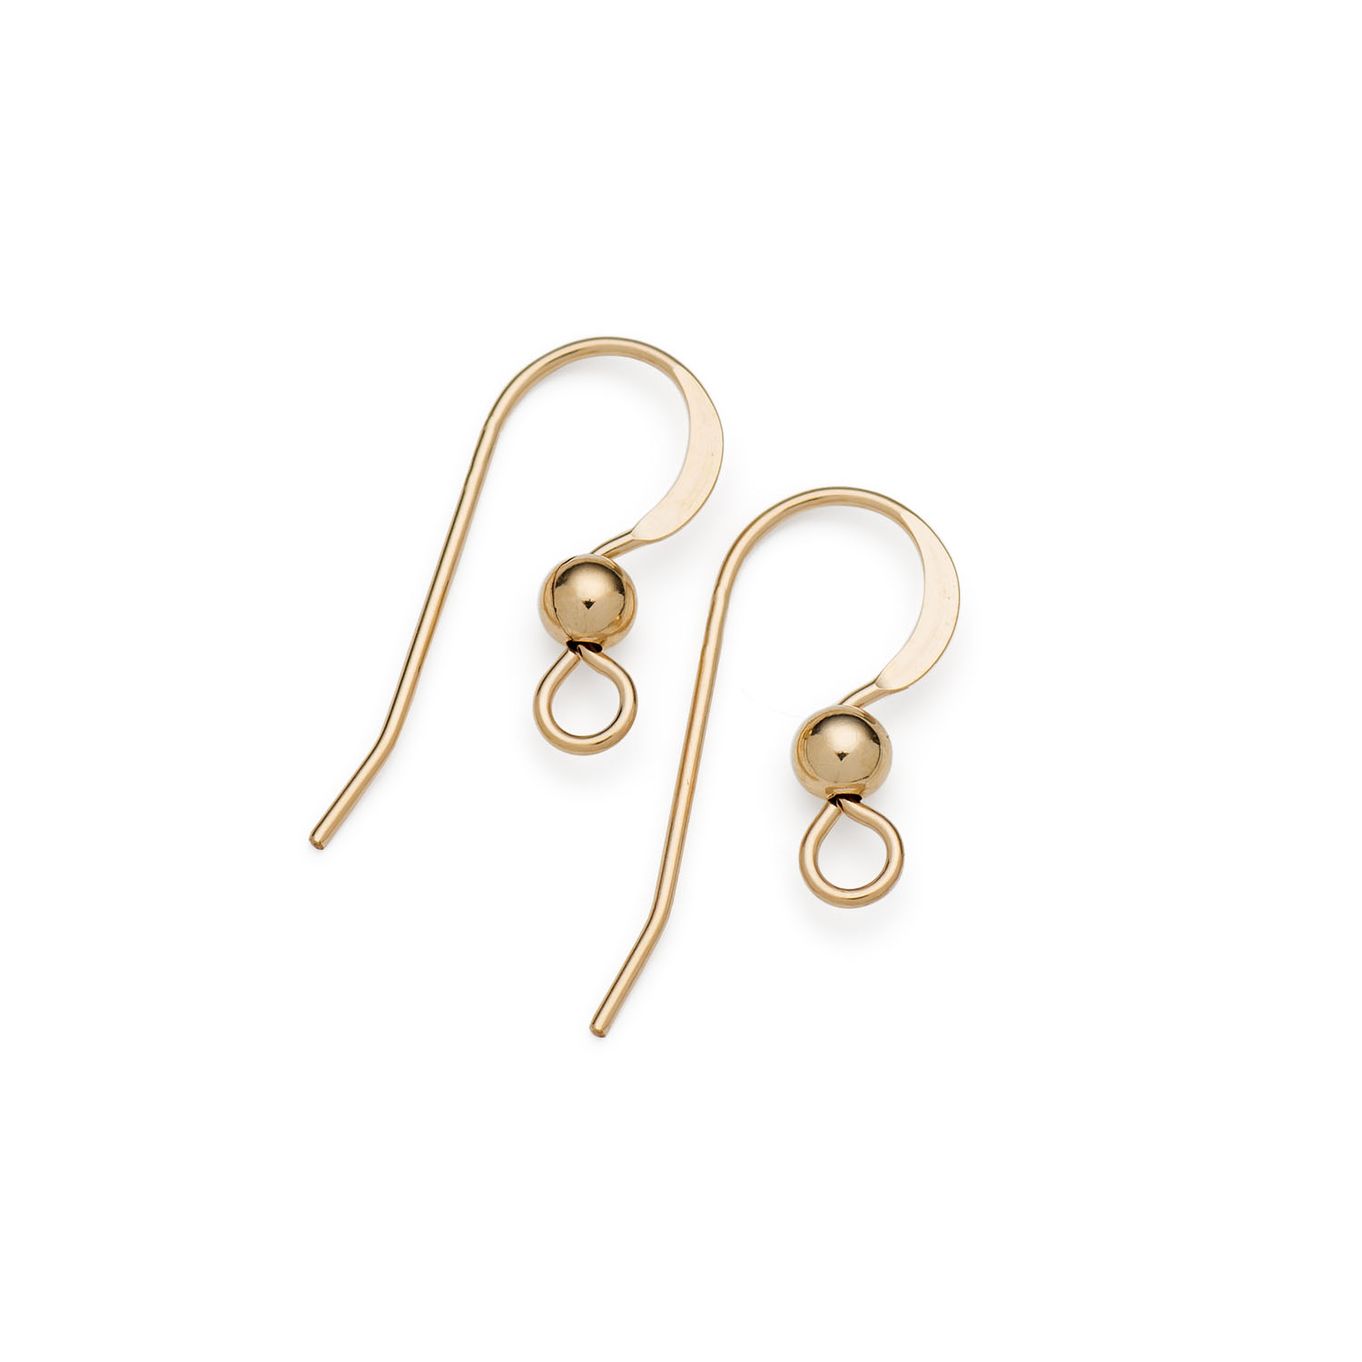 Gold Filled Shepherds Crook Earwires with Ball (Pair)